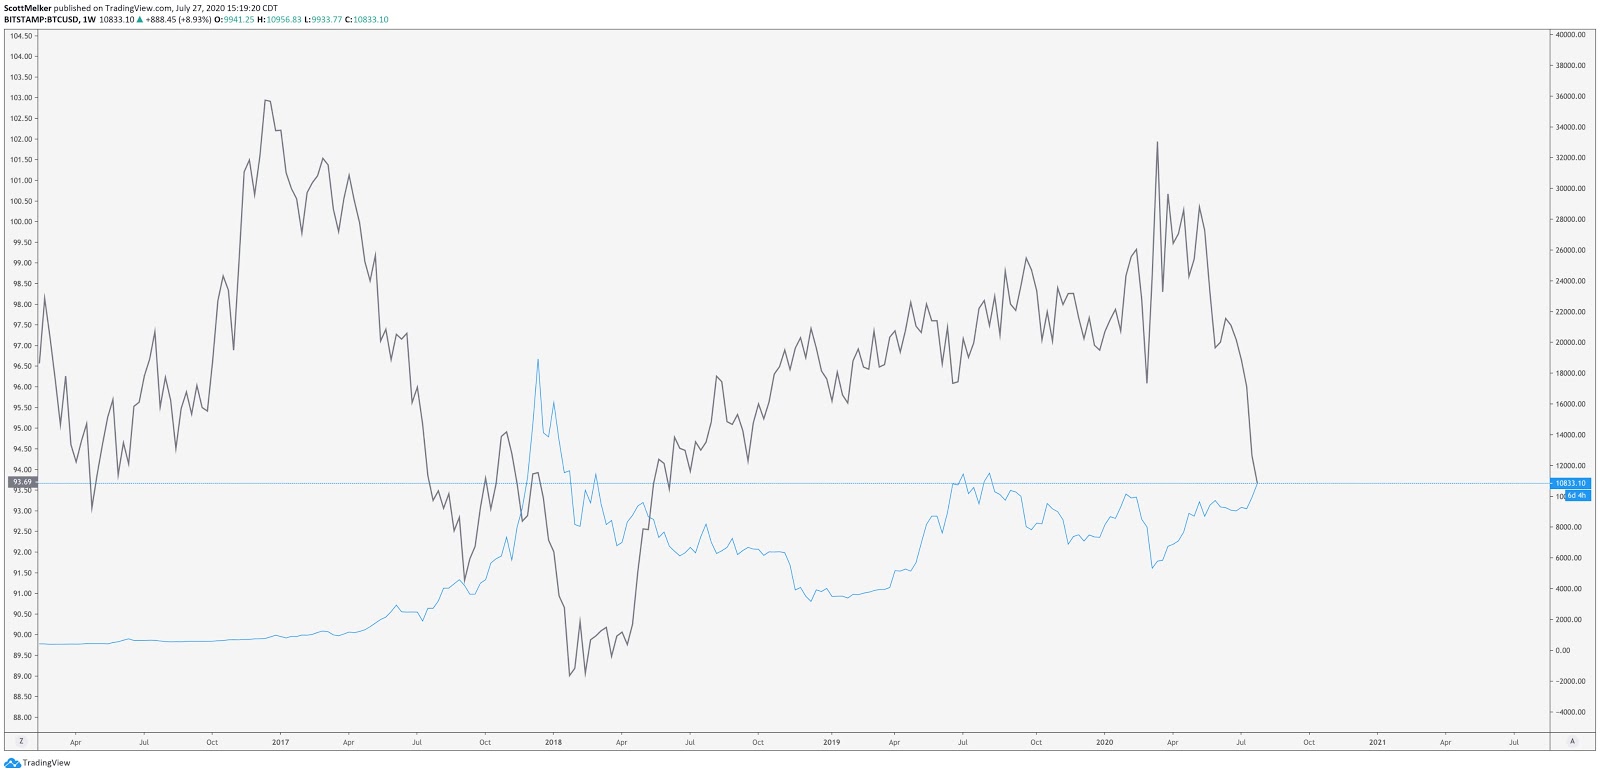 Inverse correlation with the dollar and Bitcoin